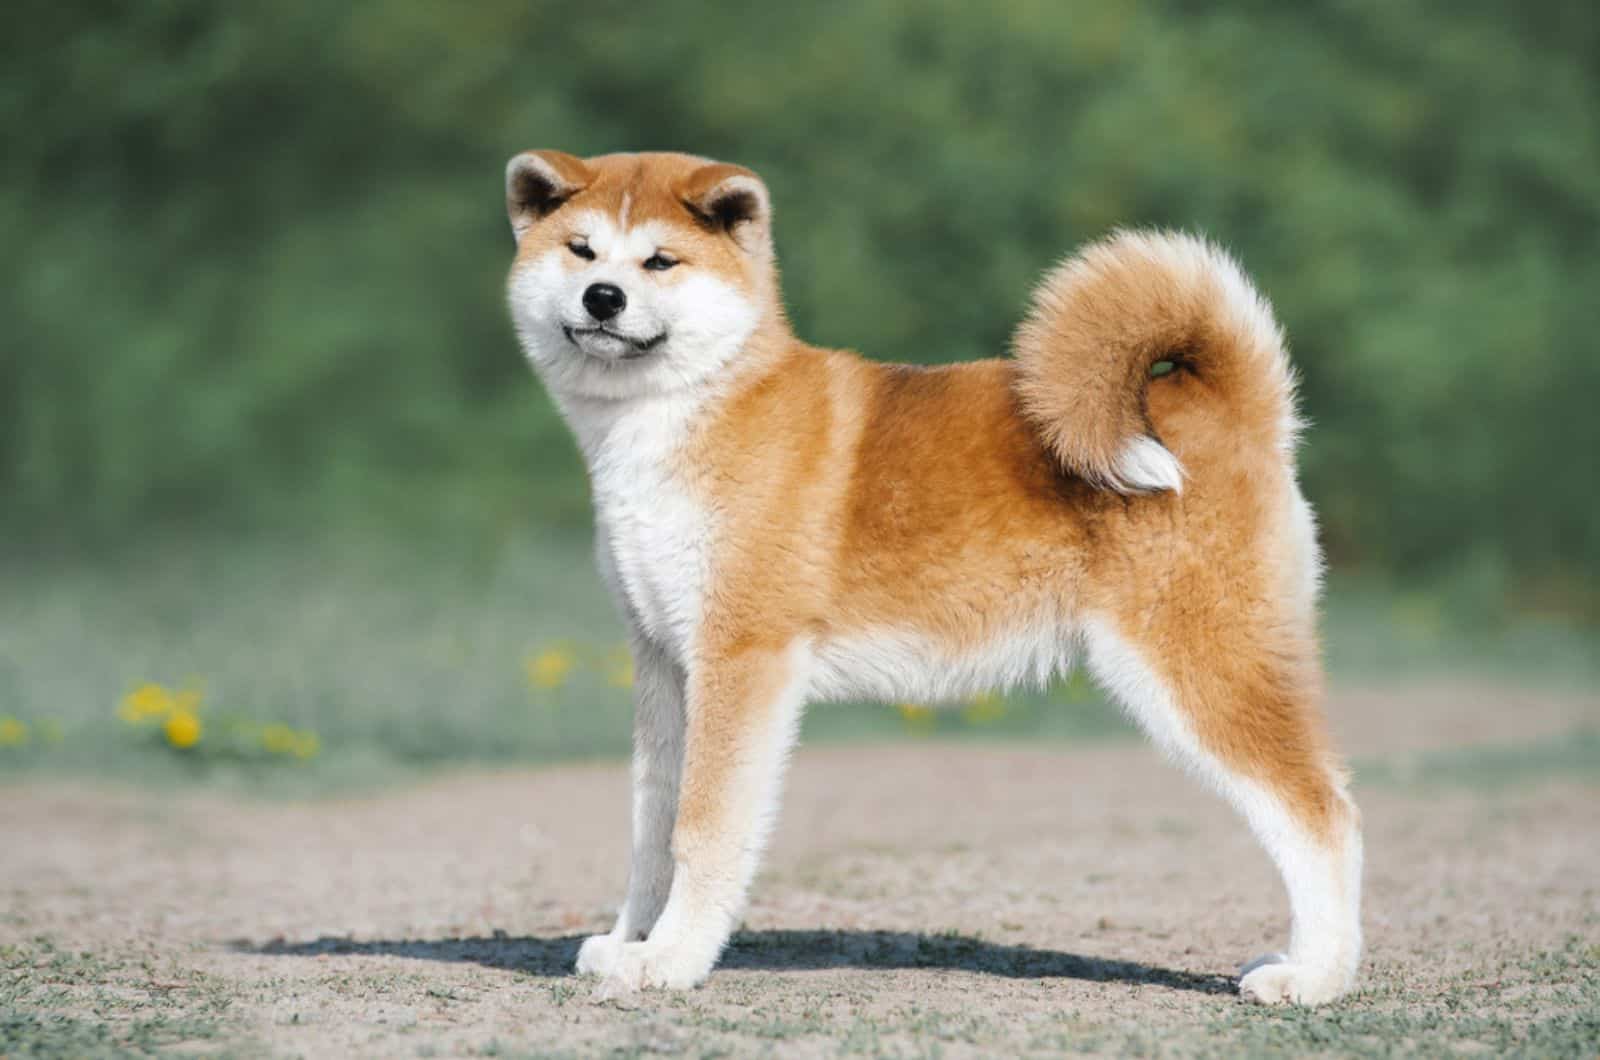 akita inu puppy standing on the road